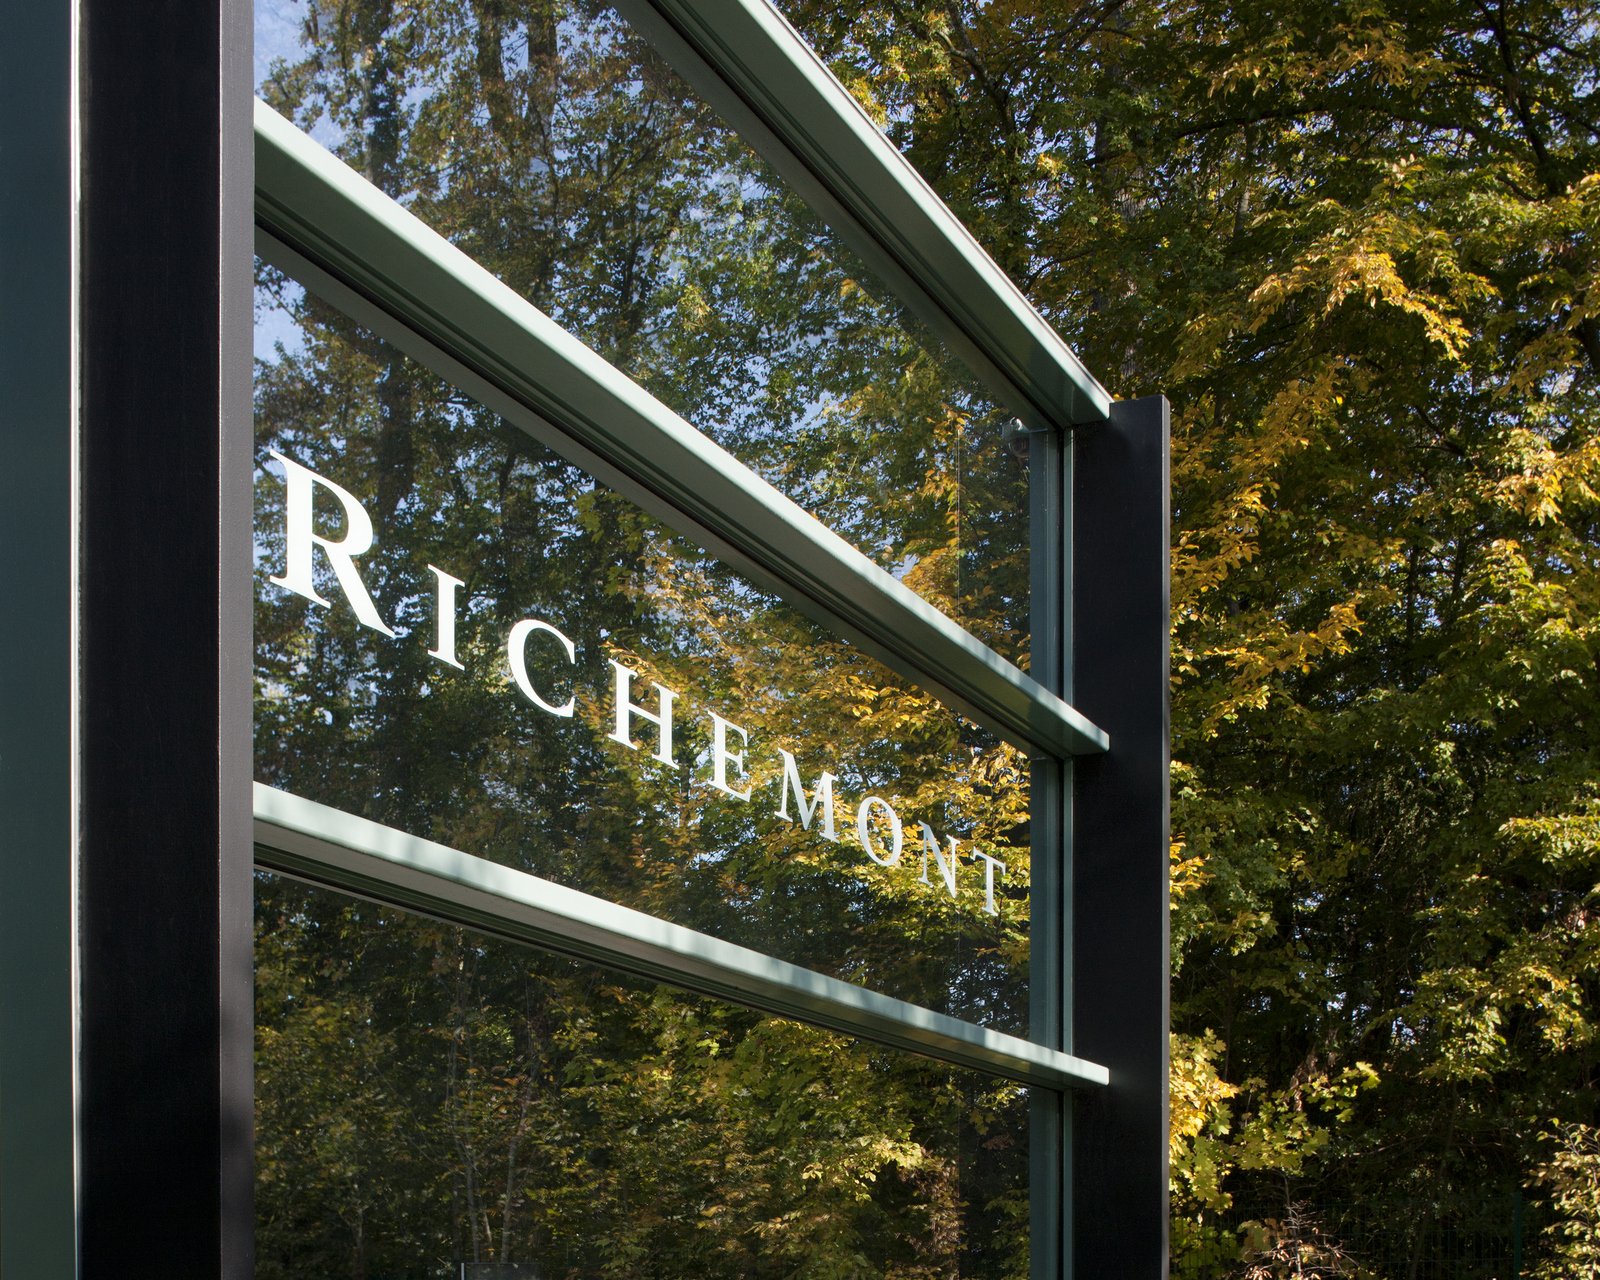 A Watch Industry Issue I Wish New Richemont Group CEO Jérôme Lambert Could  Solve